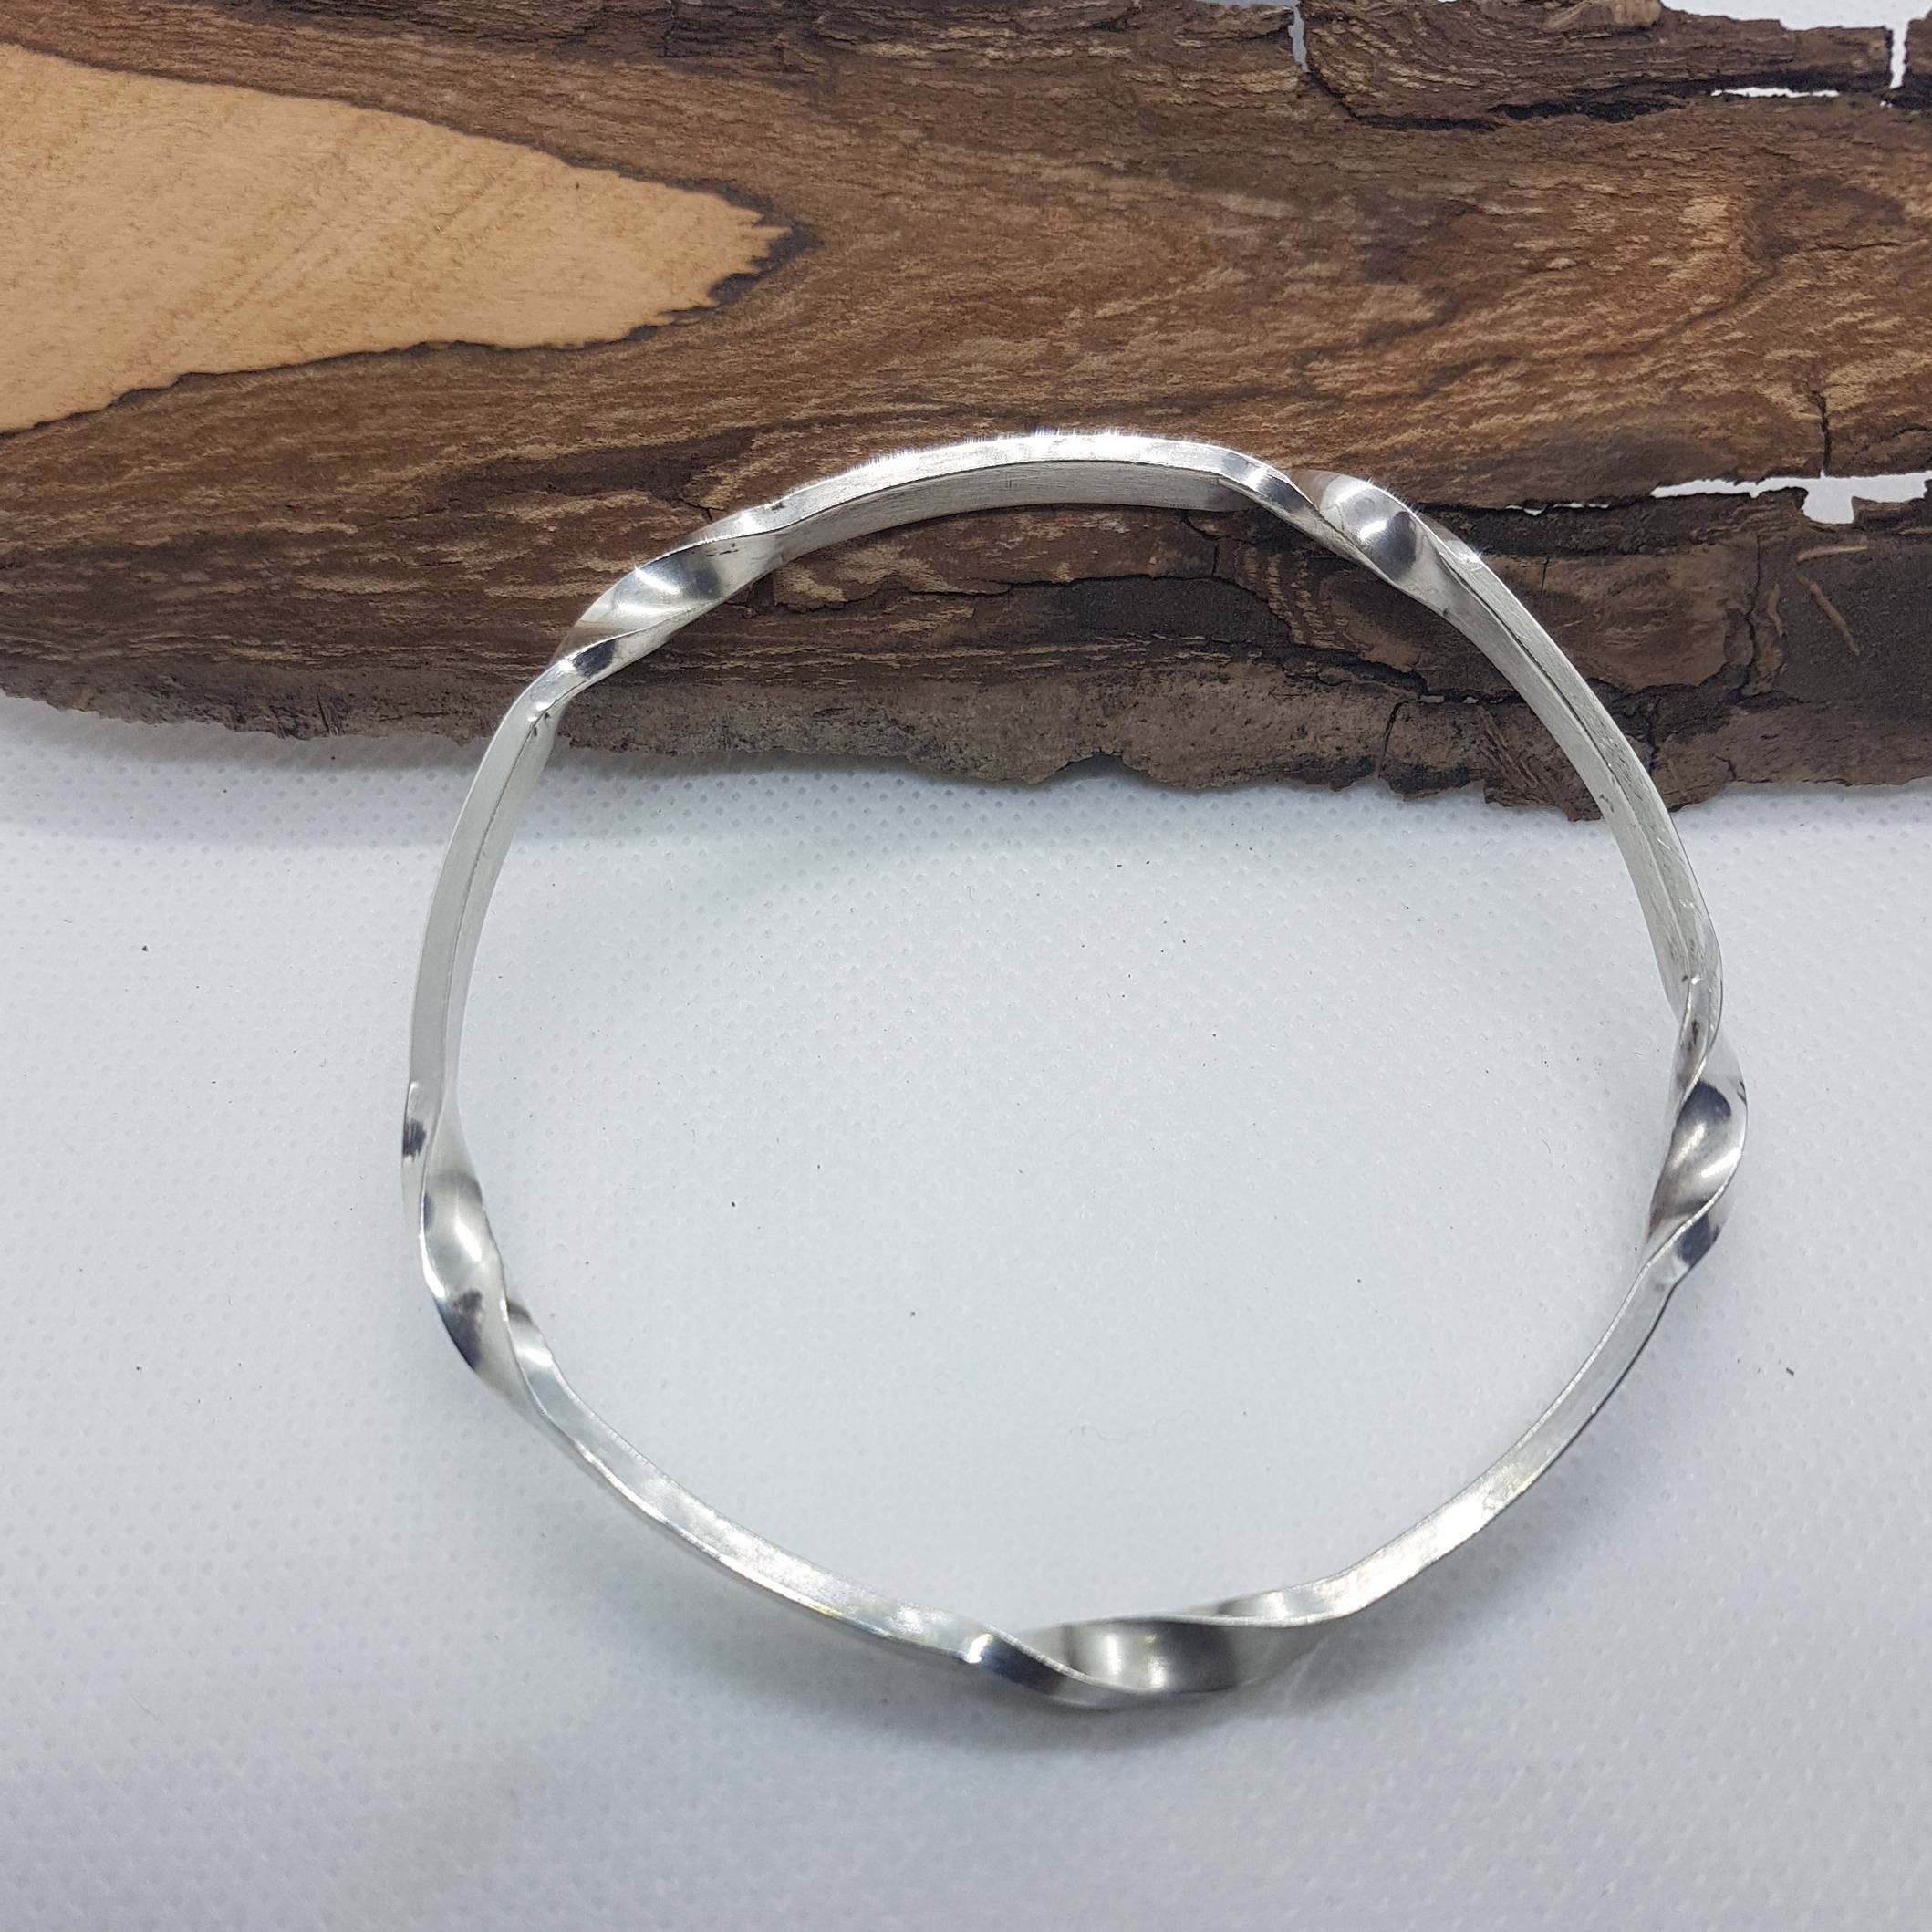 Chunky Sterling Silver Bangle With Twists, Handmade Bangle, in The Uk, Stacking Postal Gifts